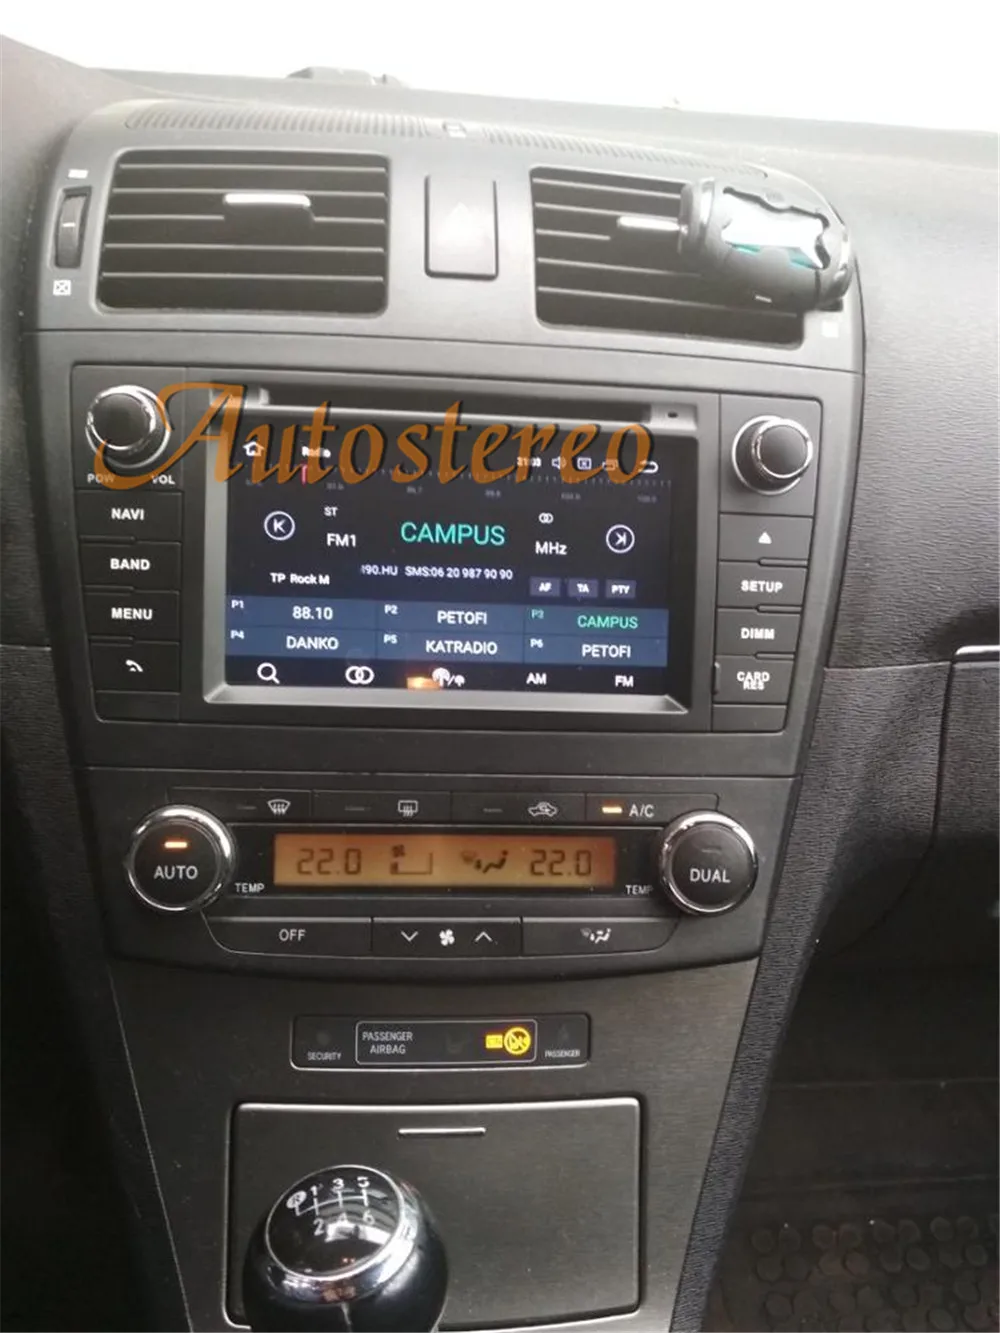 Excellent Android 9.0 Car DVD Player Autoradio for Toyota Avensis T27 2009-2015 GPS Navigation multimedia headunit radio tape recorder IPS 2